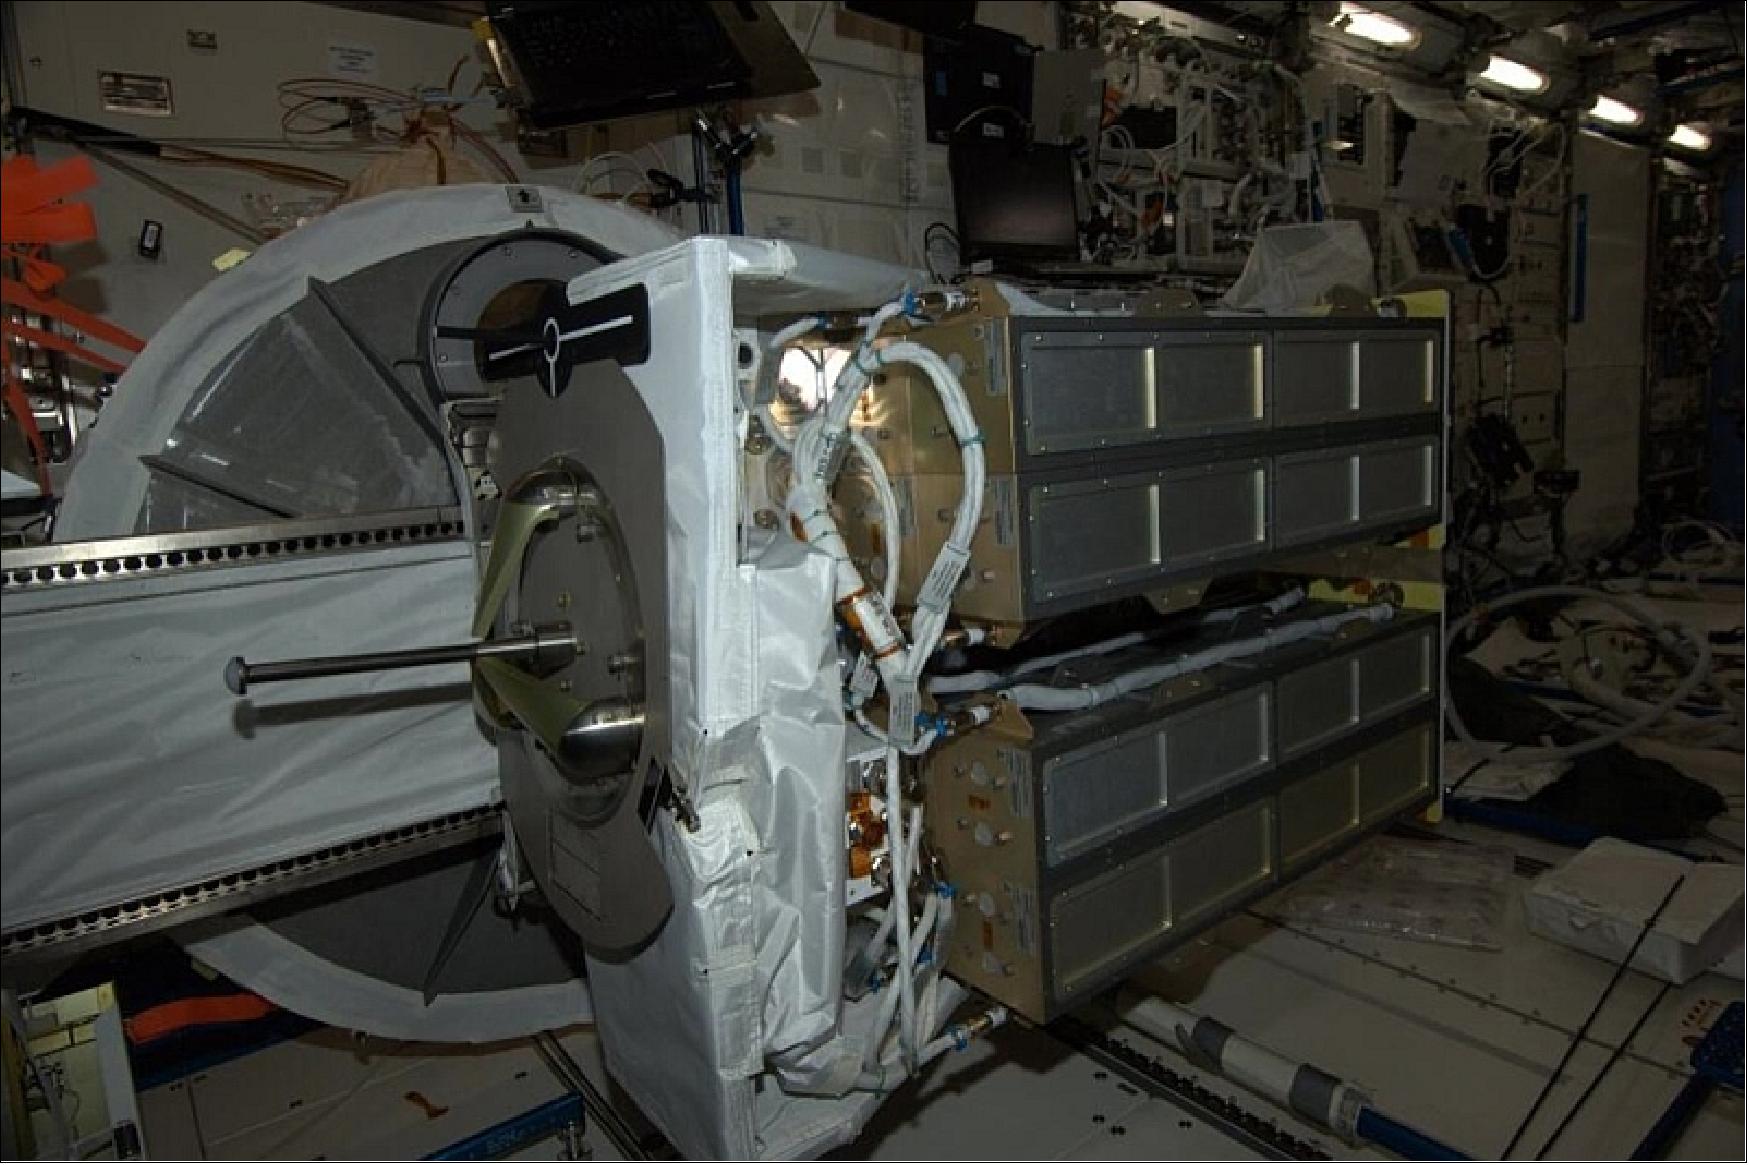 Figure 37: The Flock 1A nanosatellites are prepared for deployment on board the ISS. The photo shows four NRCSDs (NanoRacks CubeSat Deployers), each containing two Doves (image credit: Astronaut Koichi Wakata)